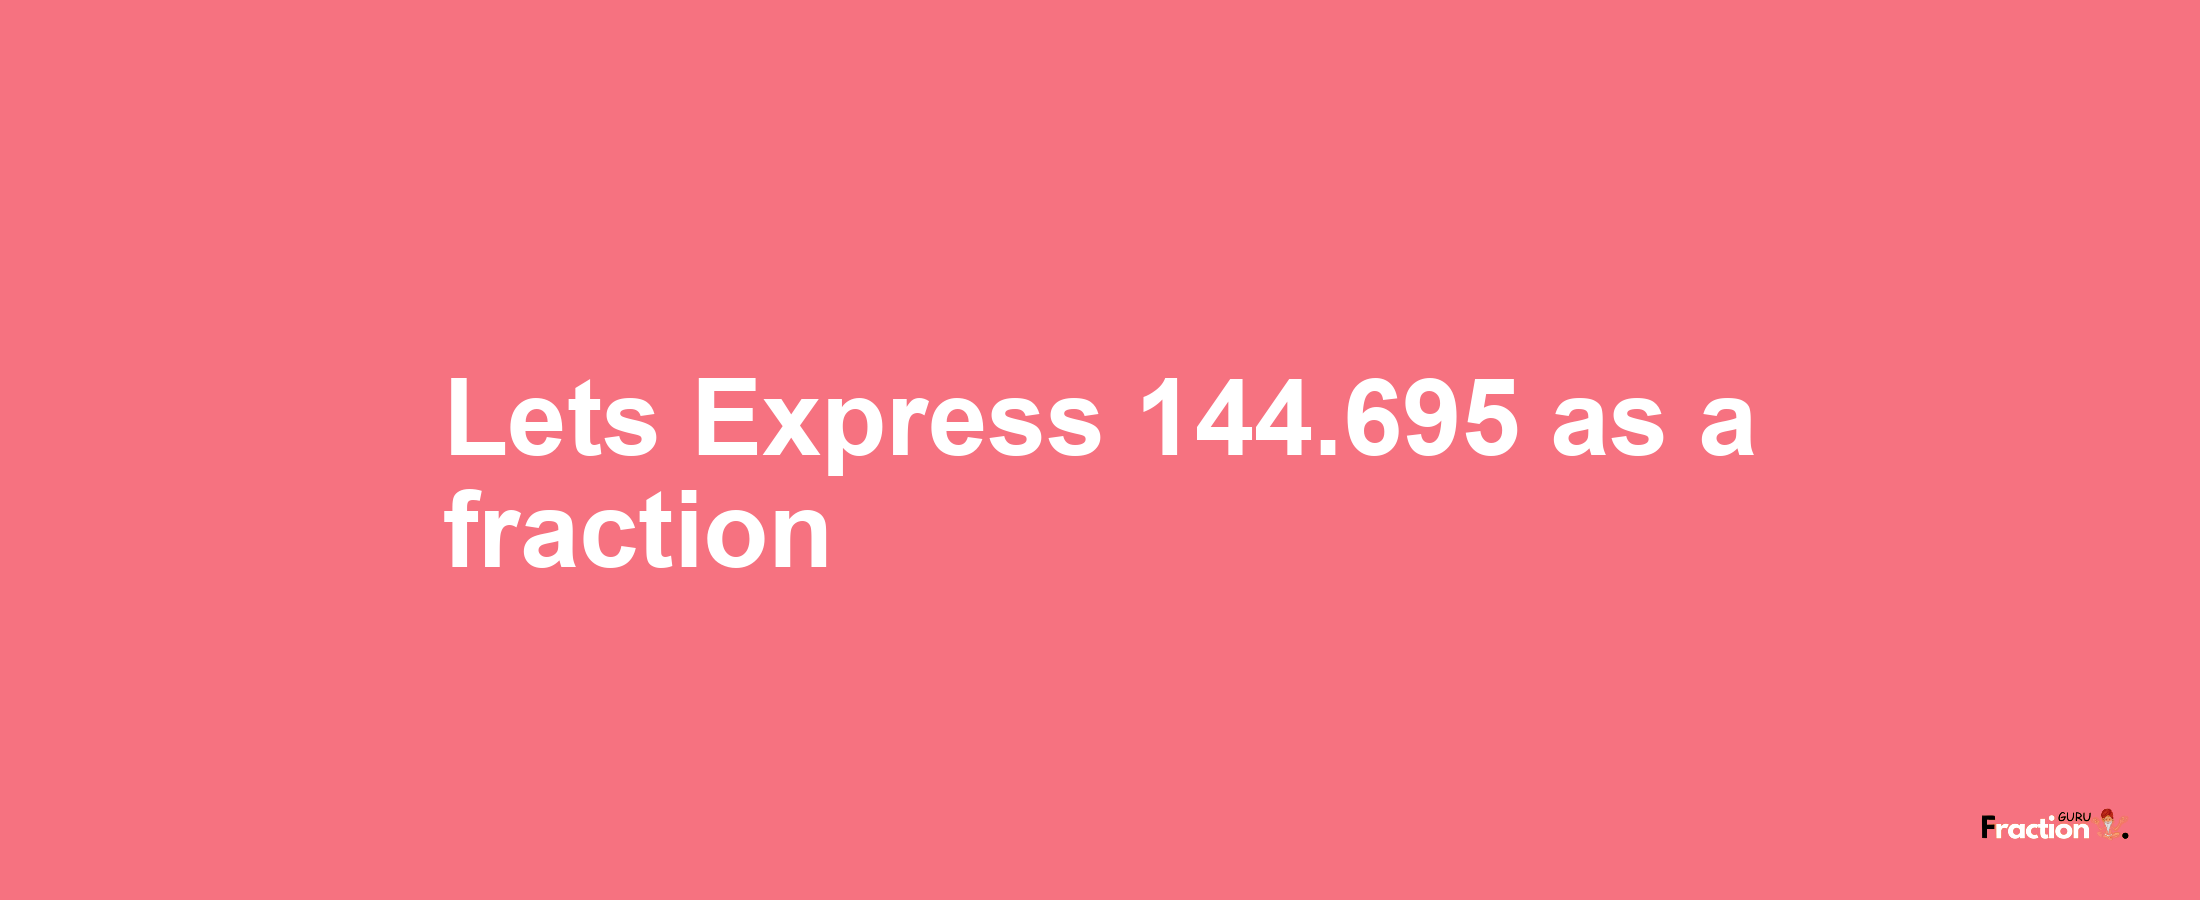 Lets Express 144.695 as afraction